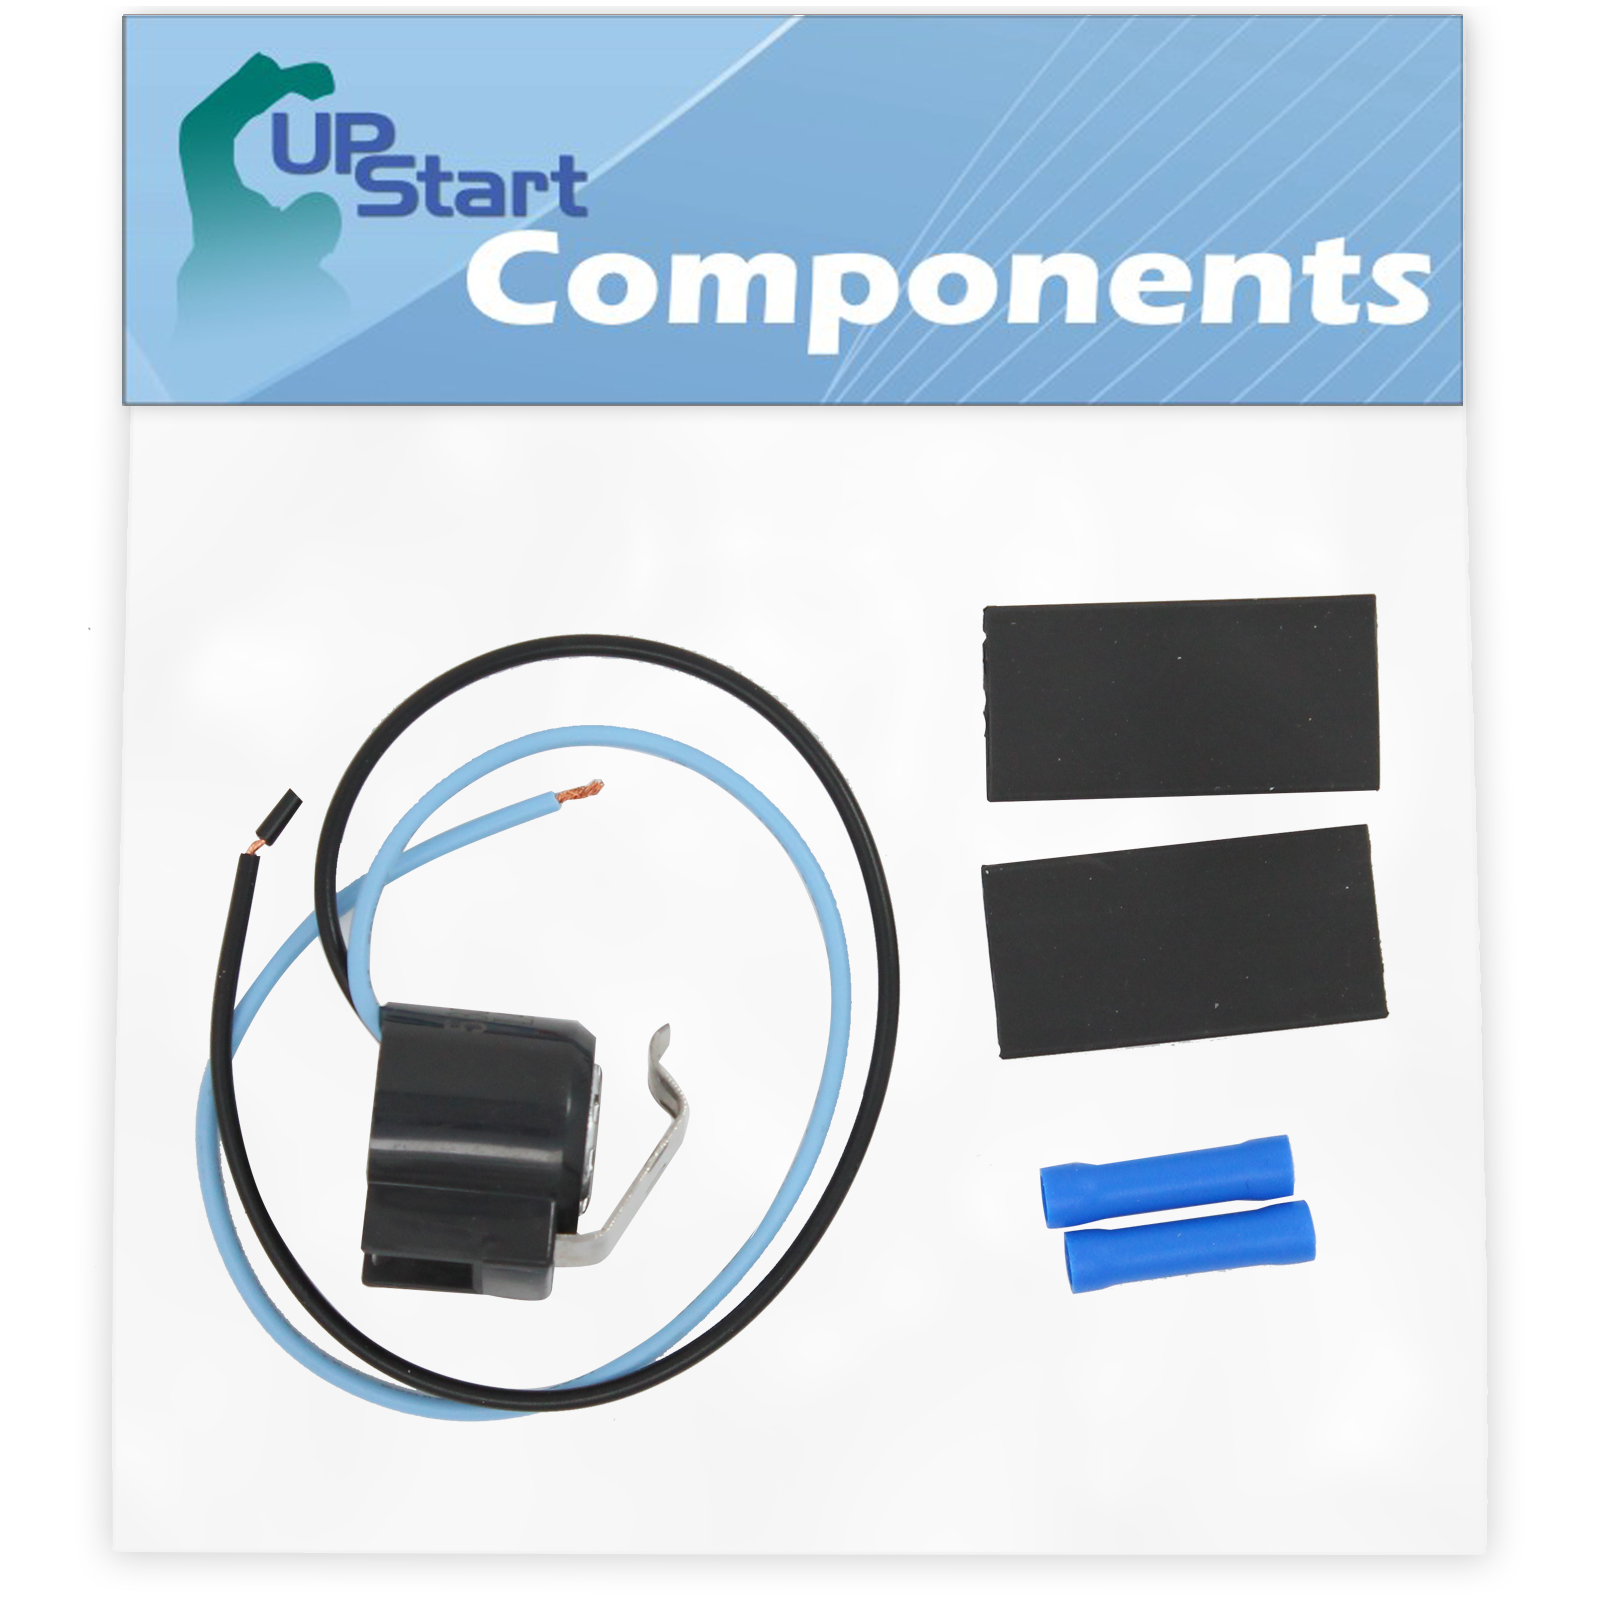 5303918214 Defrost Thermostat Replacement for Frigidaire GLHS36EEB0 Refrigerator - Compatible with 5303918214 Defrost Thermostat Kit - UpStart Components Brand - image 1 of 2